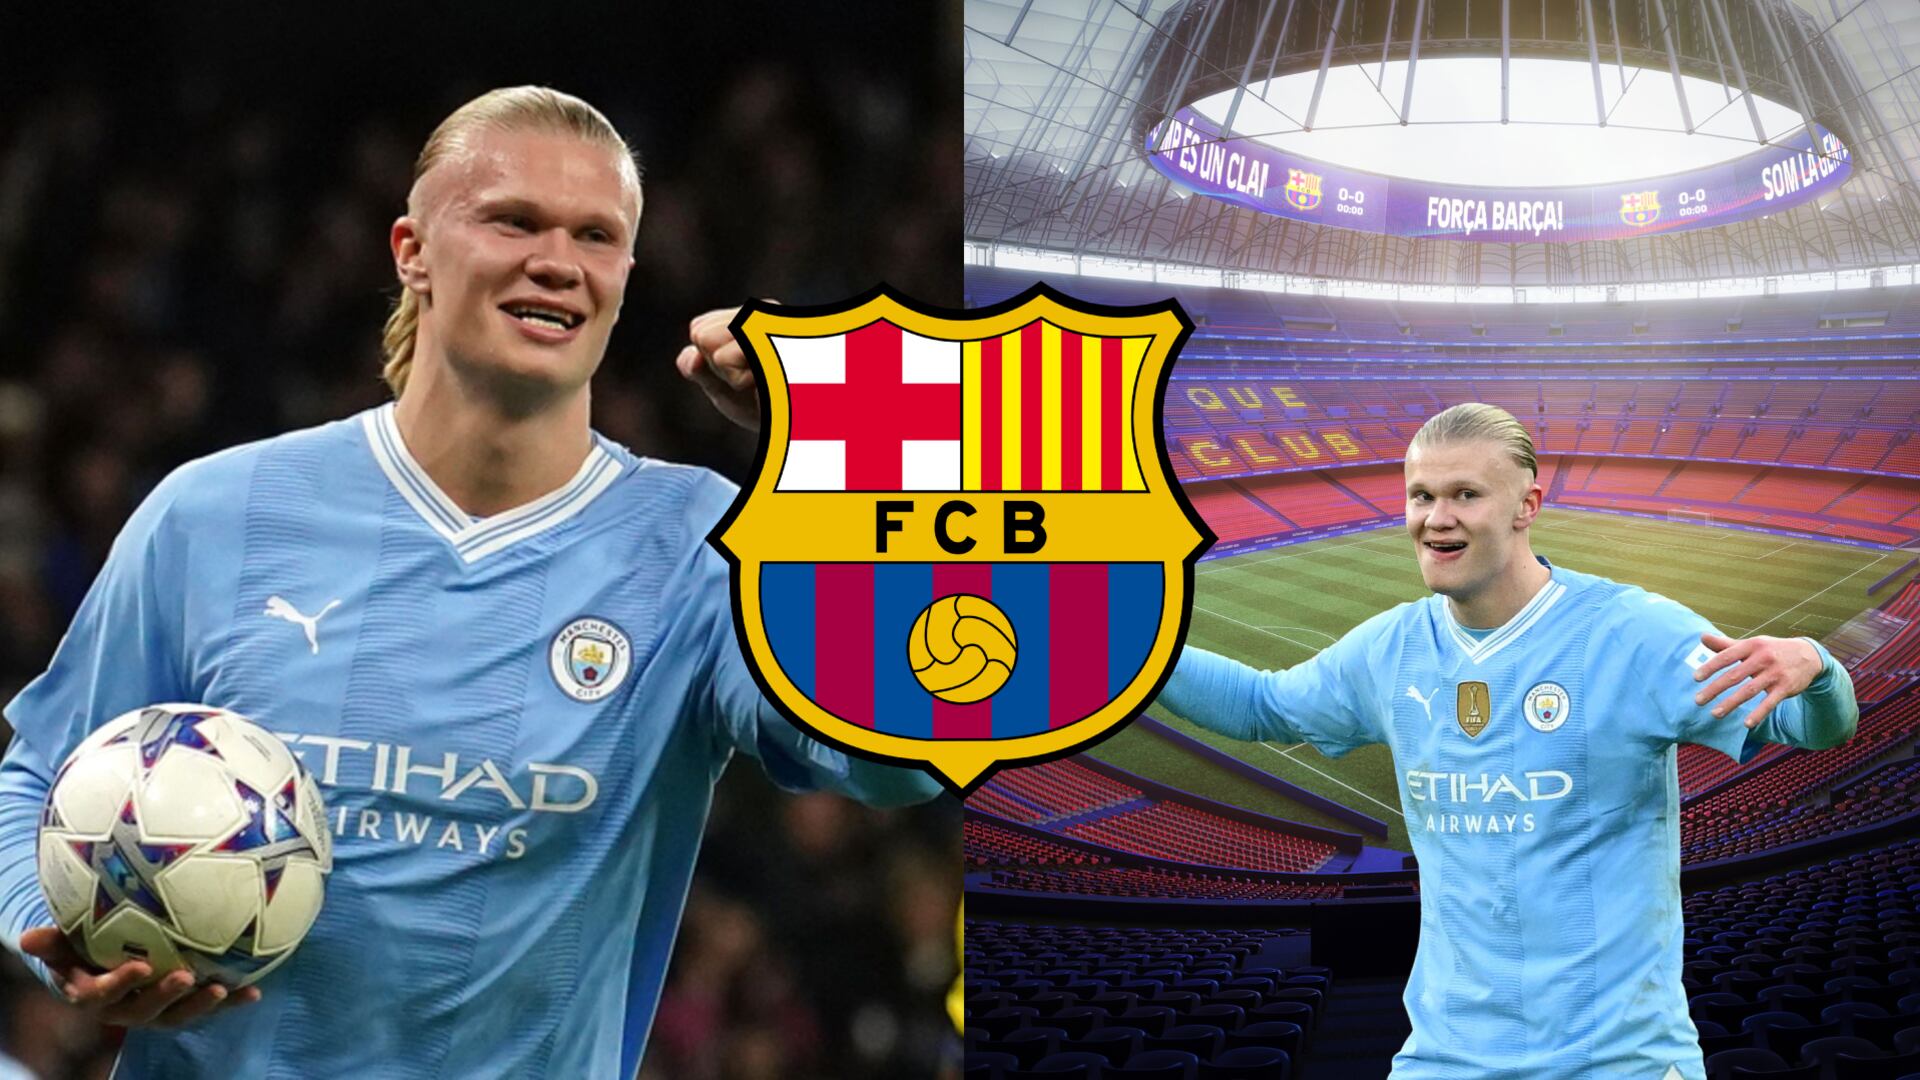 Erling Haaland to FC Barcelona? When the club plans to sign the Man City striker